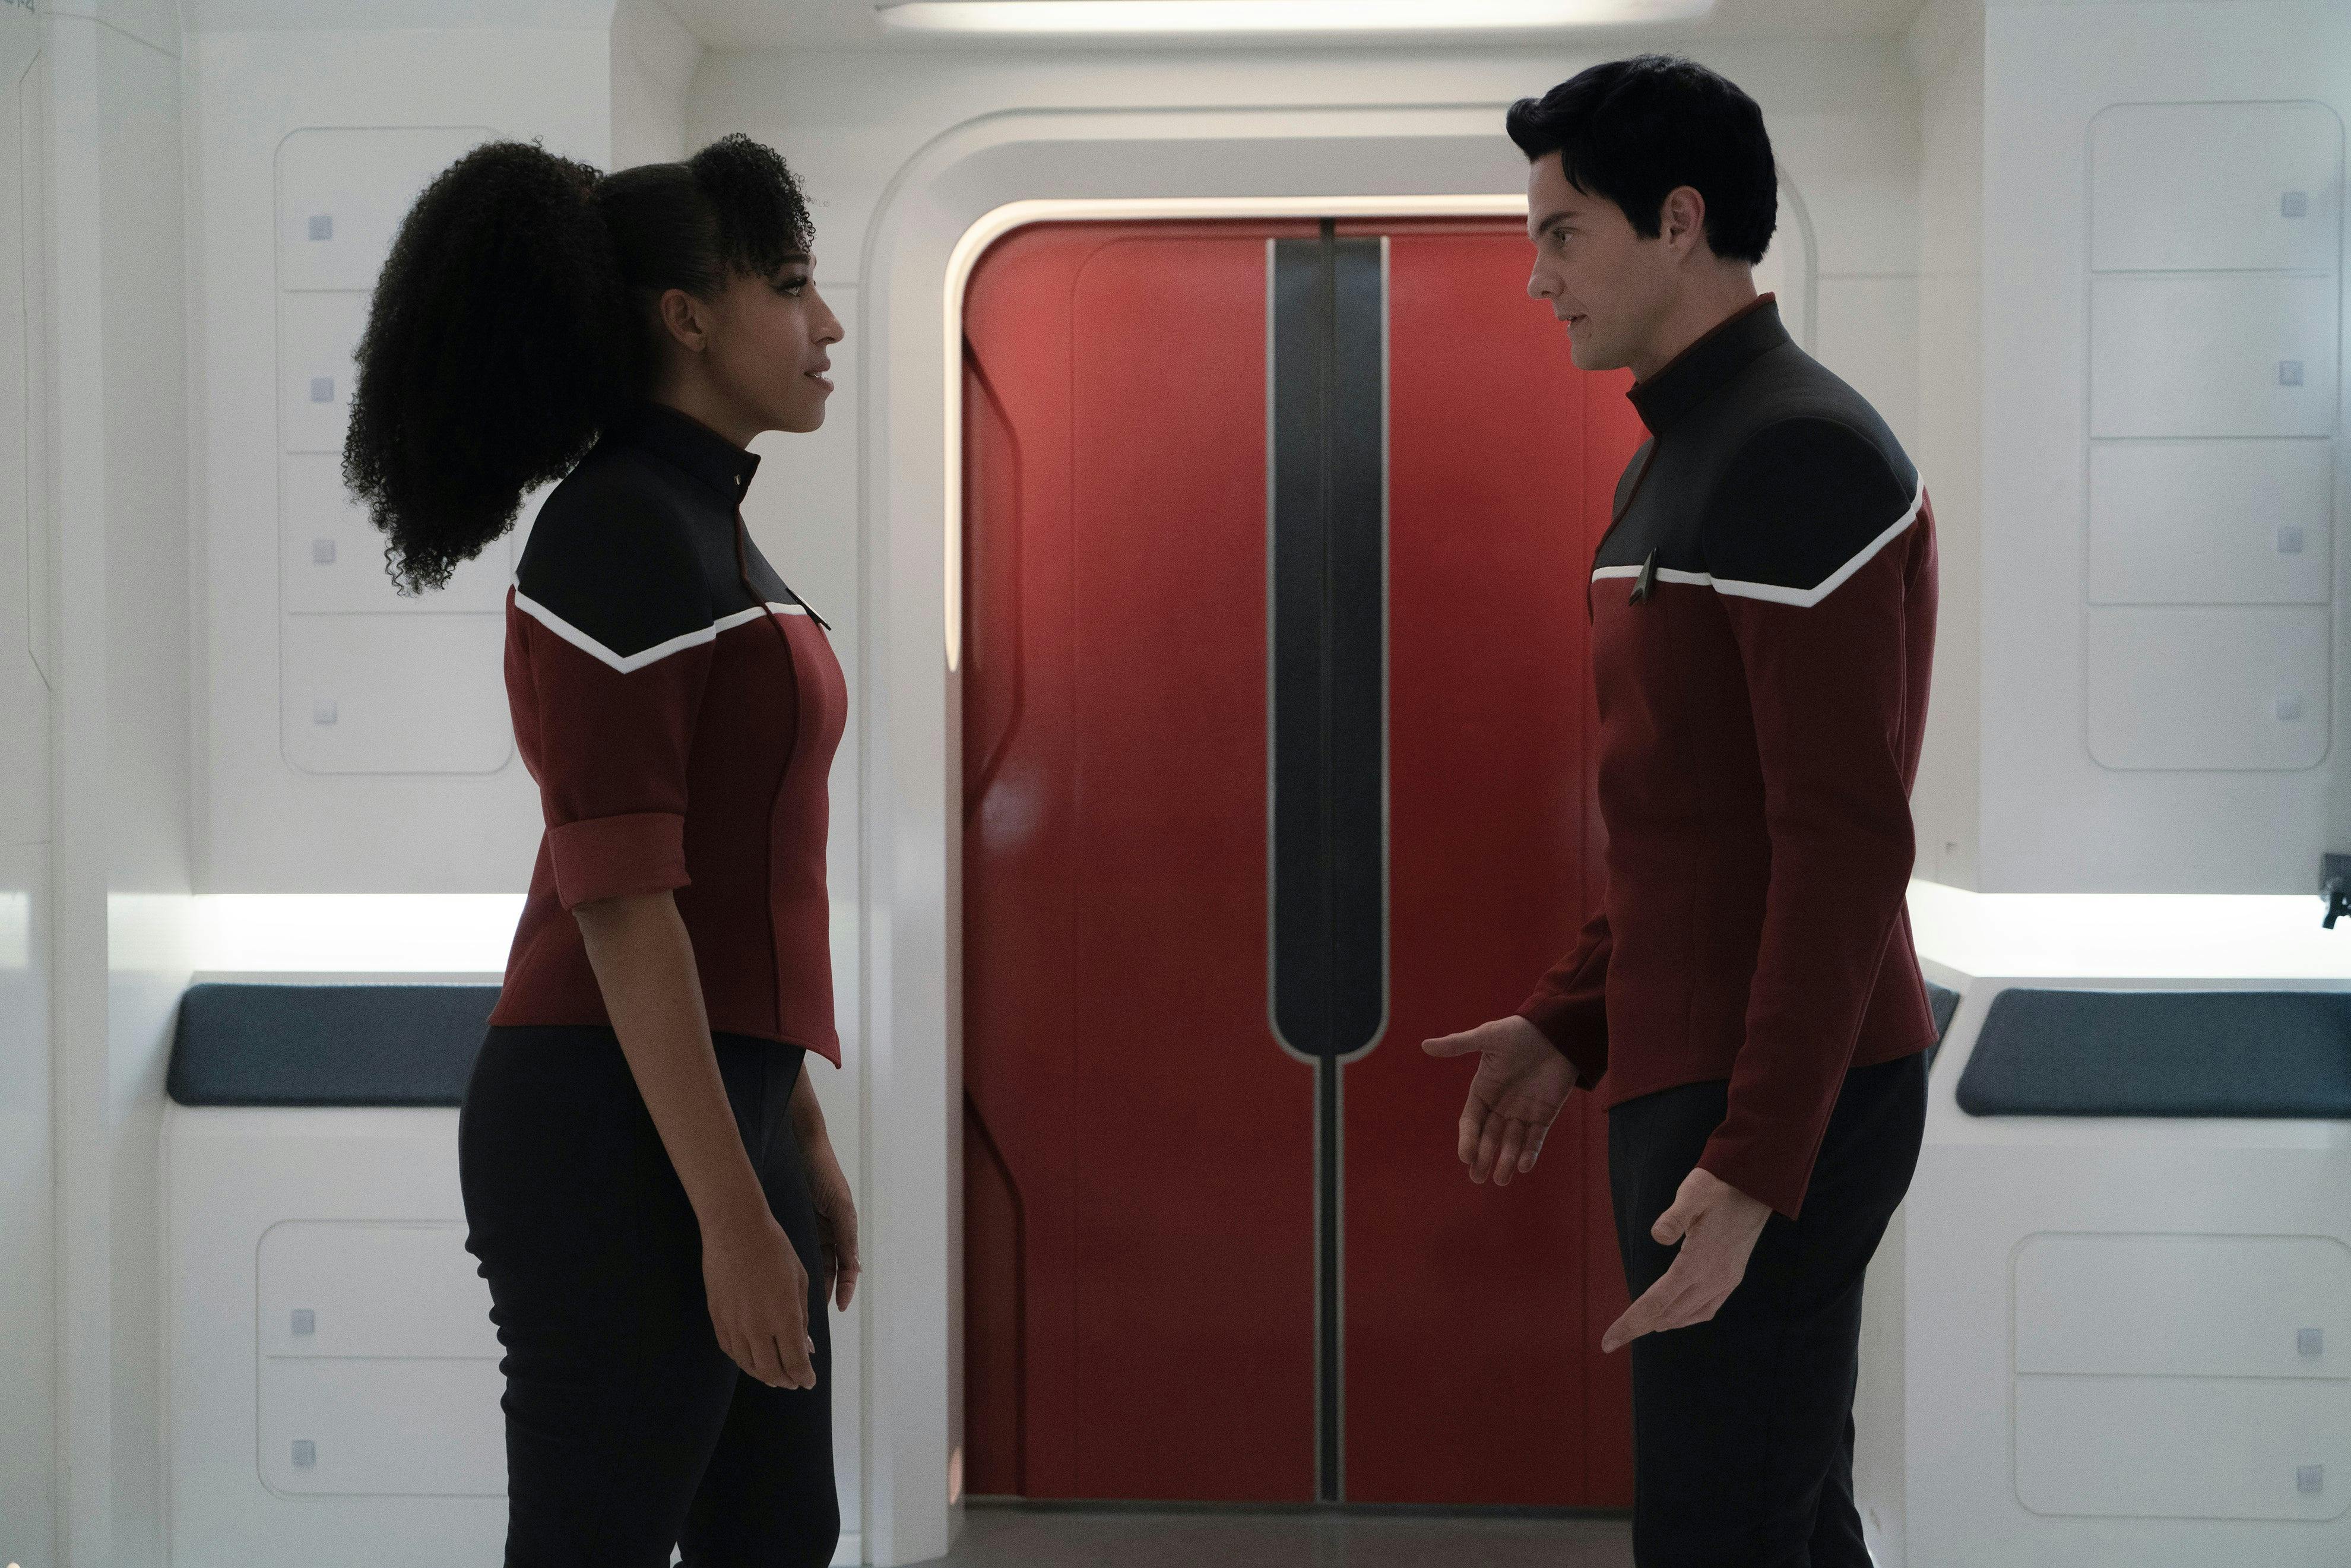 Mariner and Boimler touch base in the corridor of the Enterprise in 'Those Old Scientists'